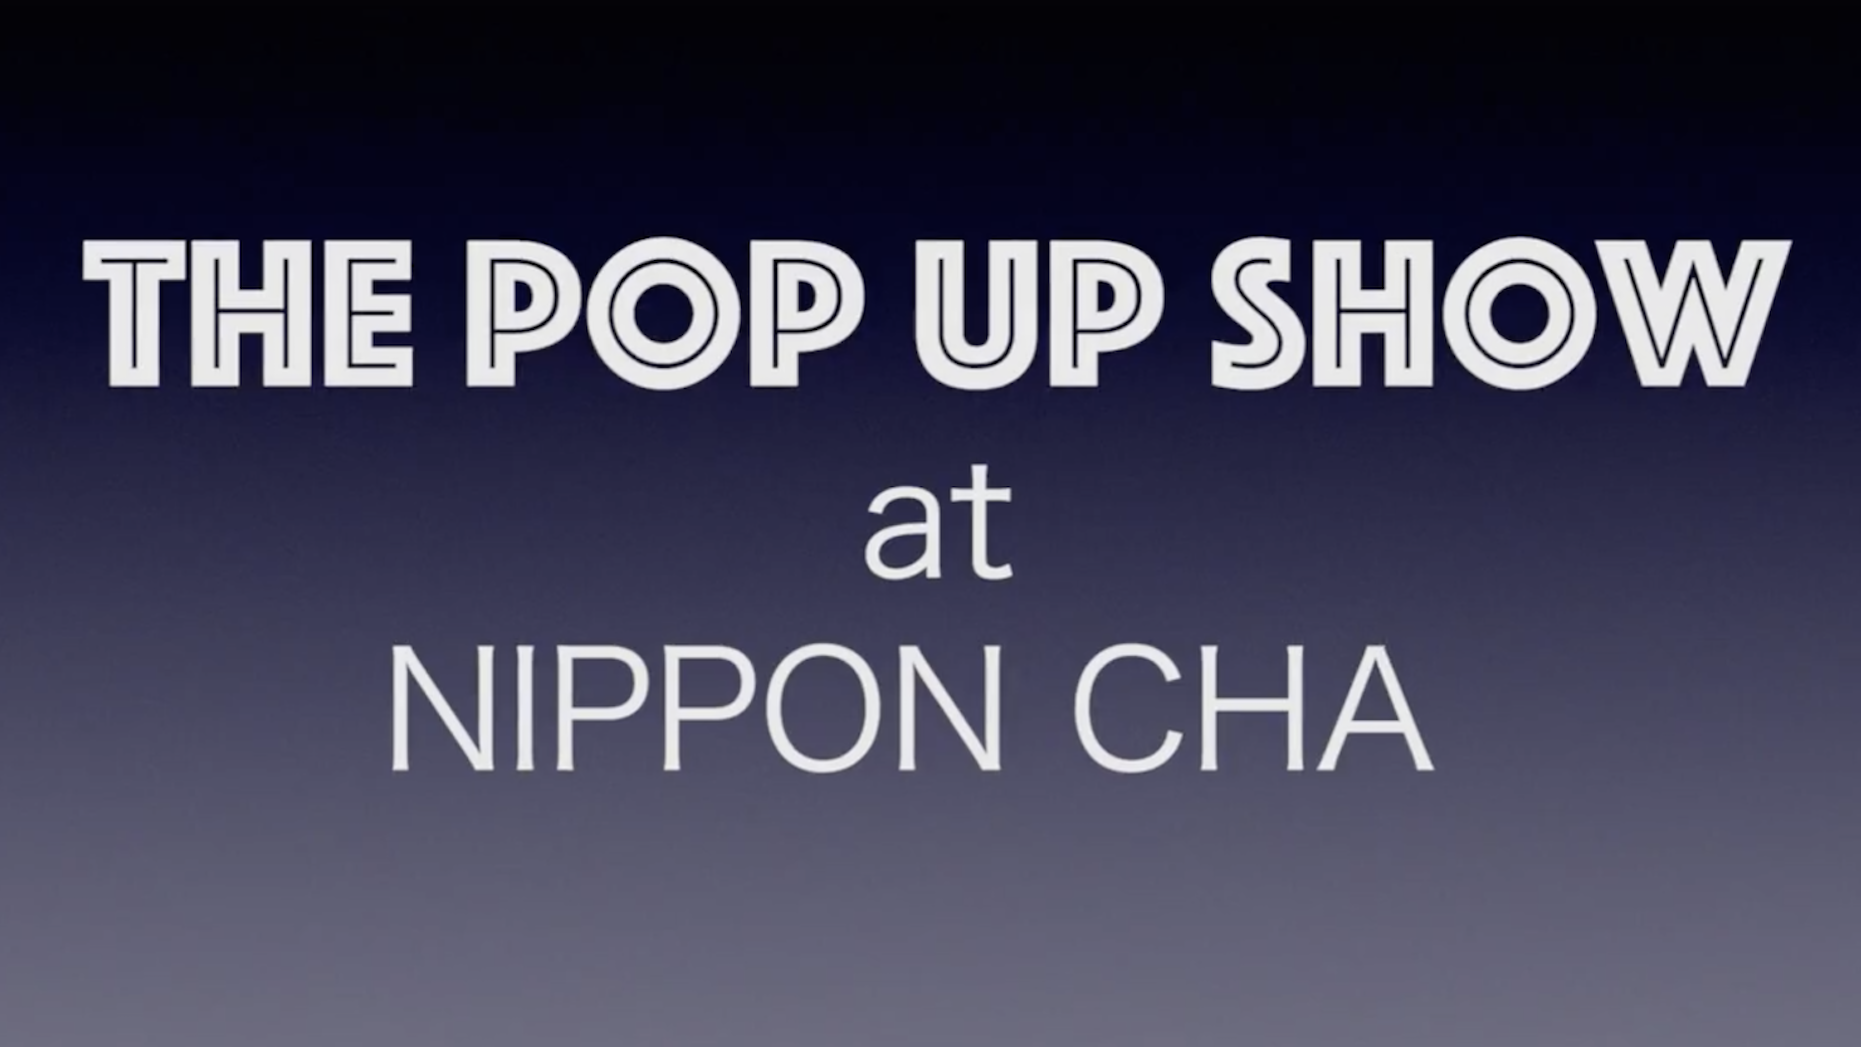 “The Pop Up Show” from Nippon Cha